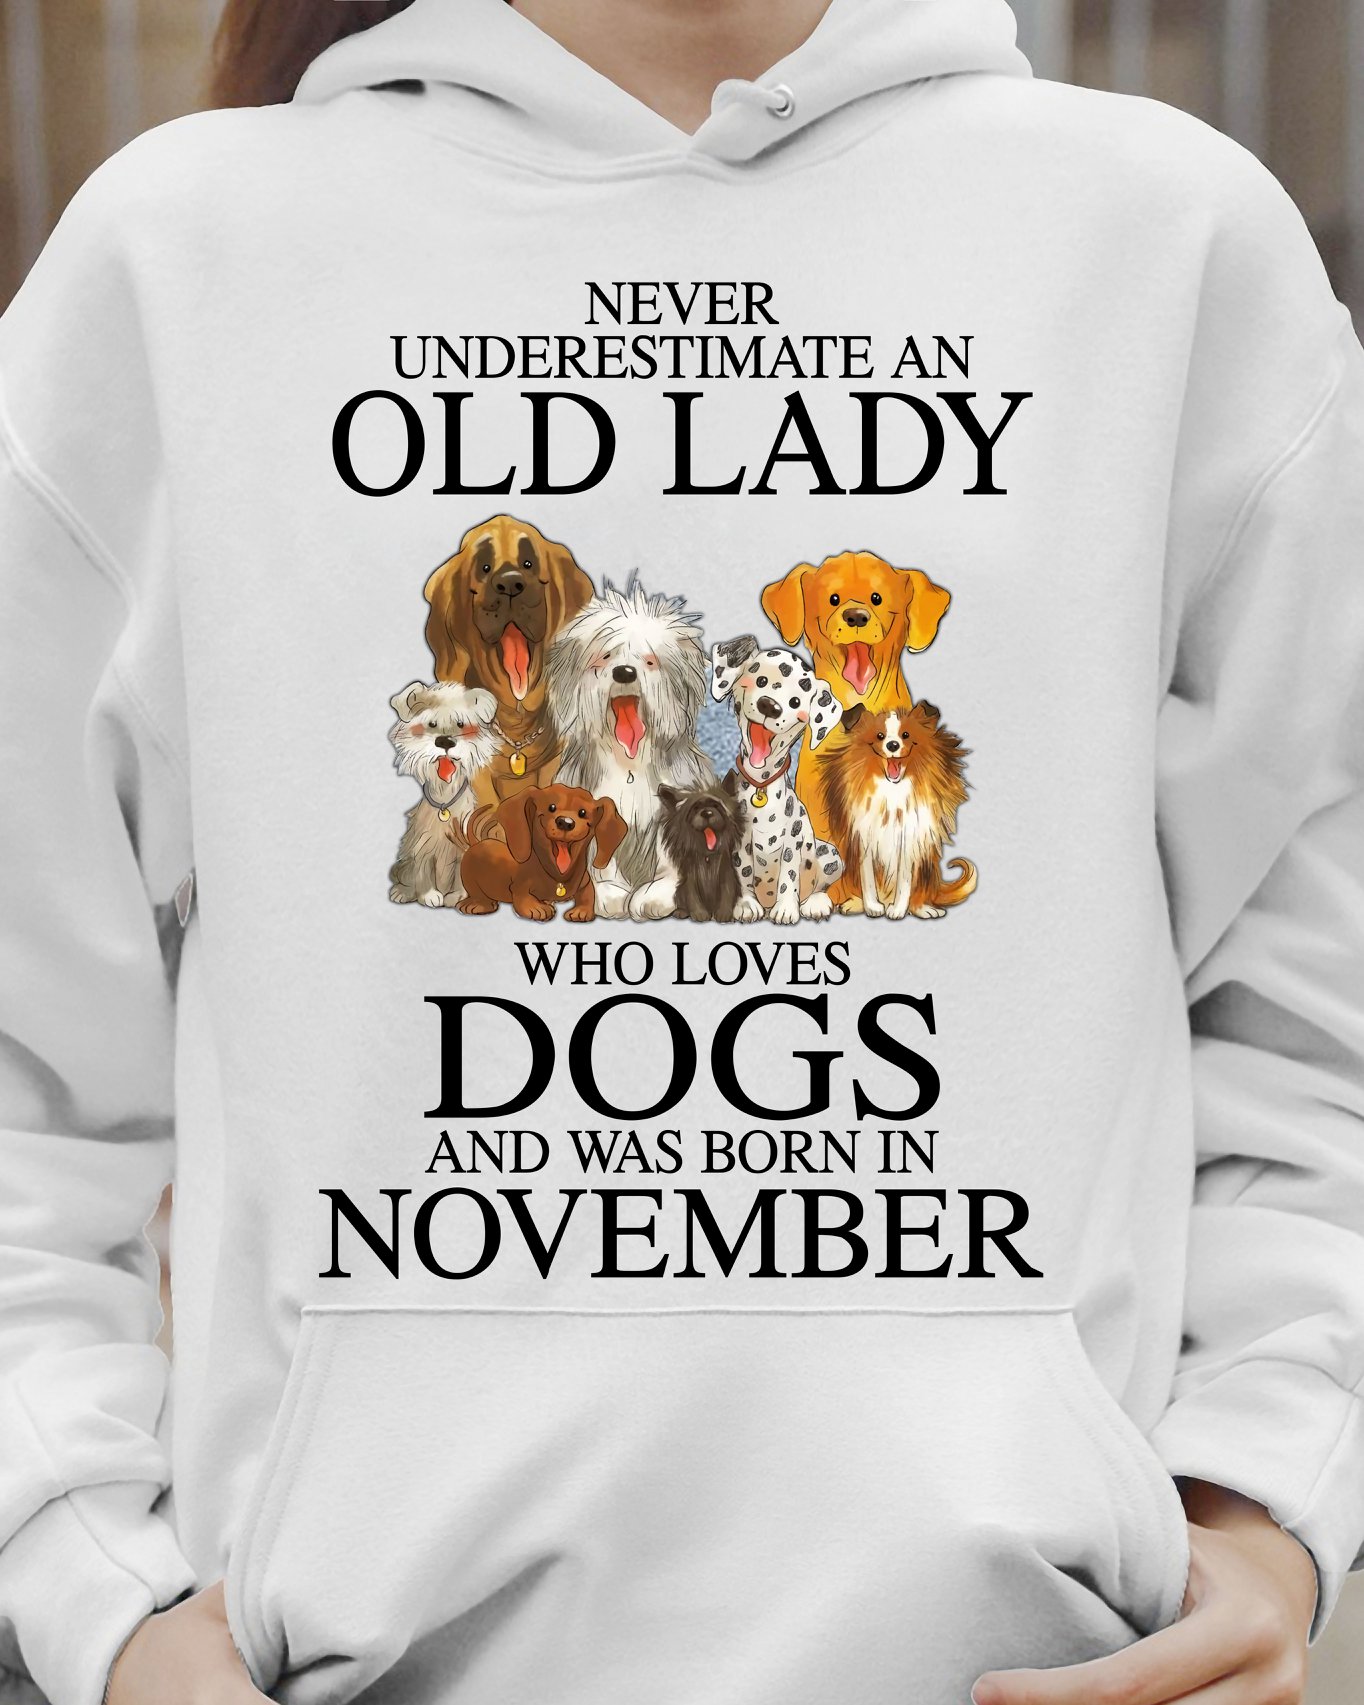 Never underestimate an old lady who loves dogs and was born in November